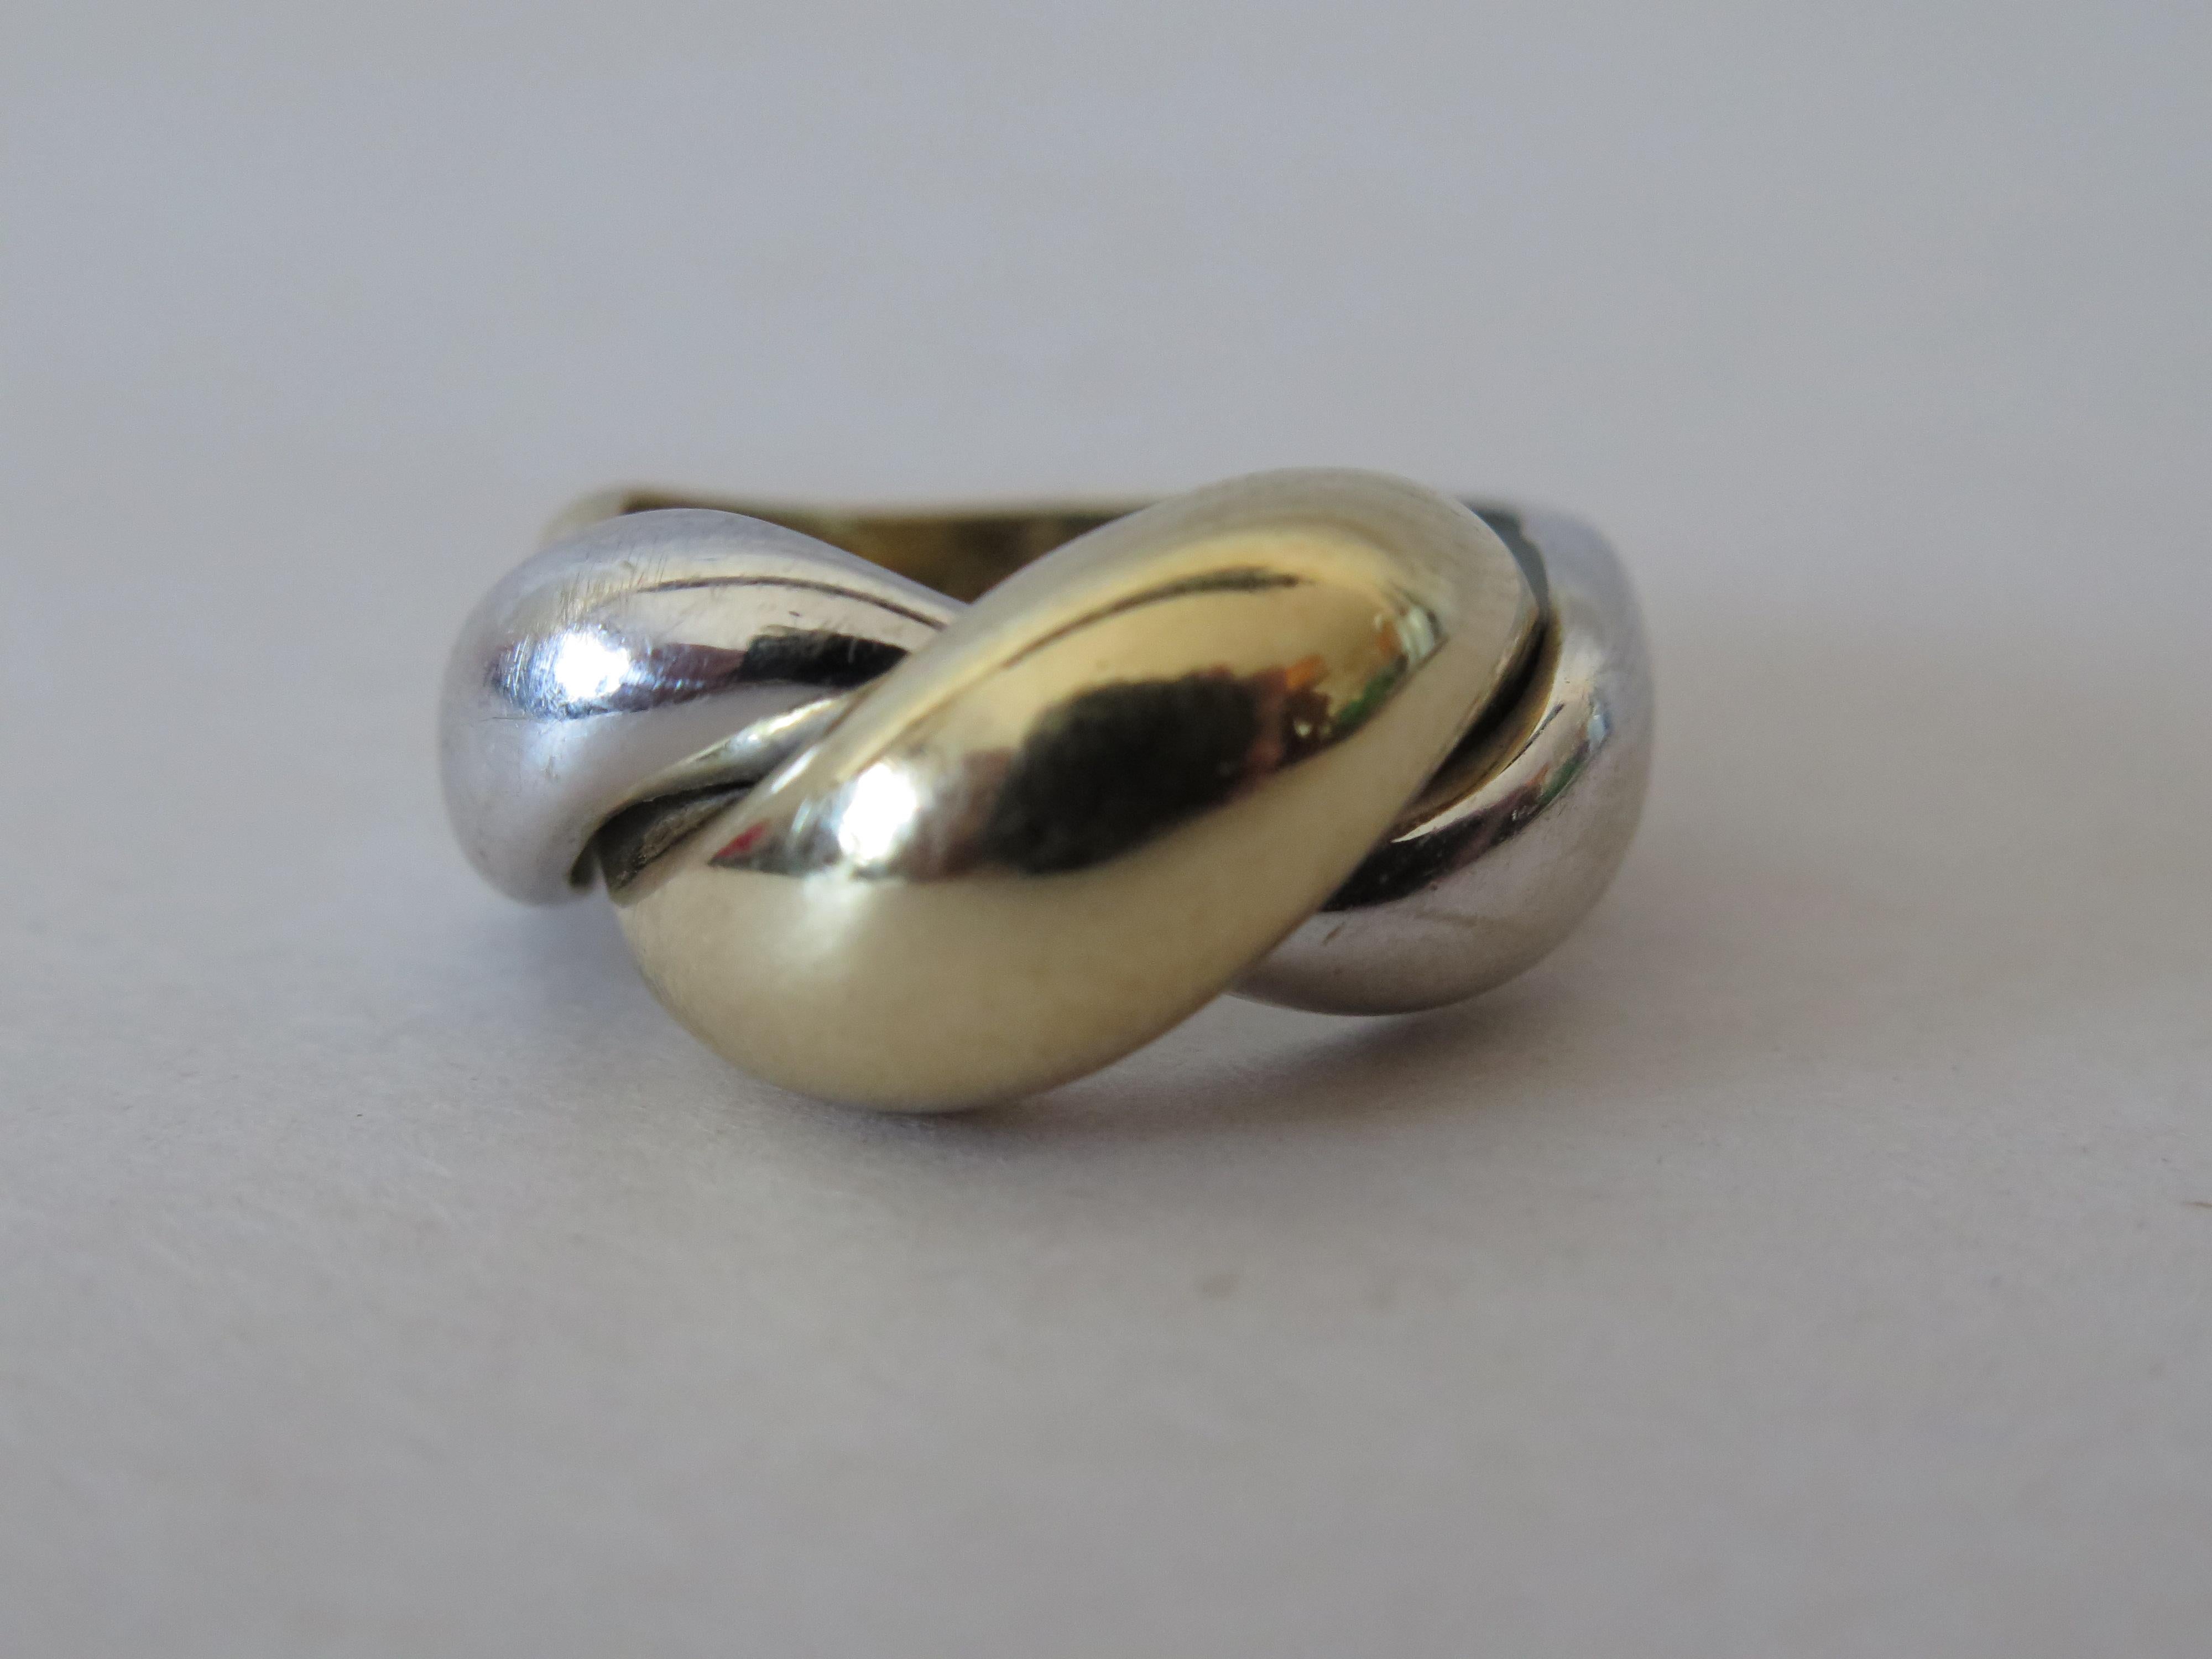 Unusual Le Gi Italian Designer Ring size  7 1/2 14K Gold Ring Total Weight 6.4g. Bimetal -white and yellow gold.